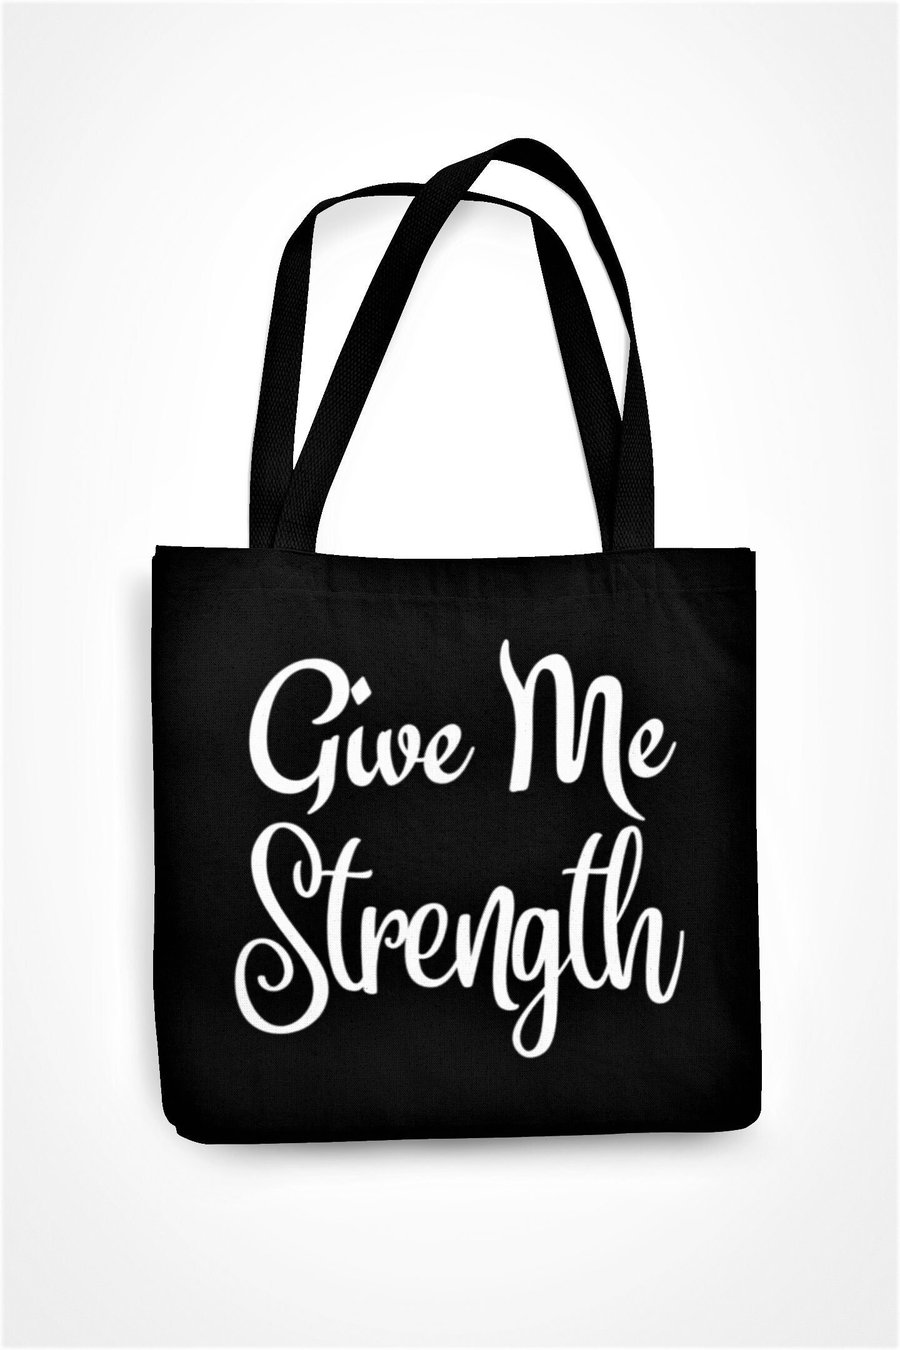 Give Me Strength Tote Bag Funny Sassy Bag Birthday Present For Friend Family - 